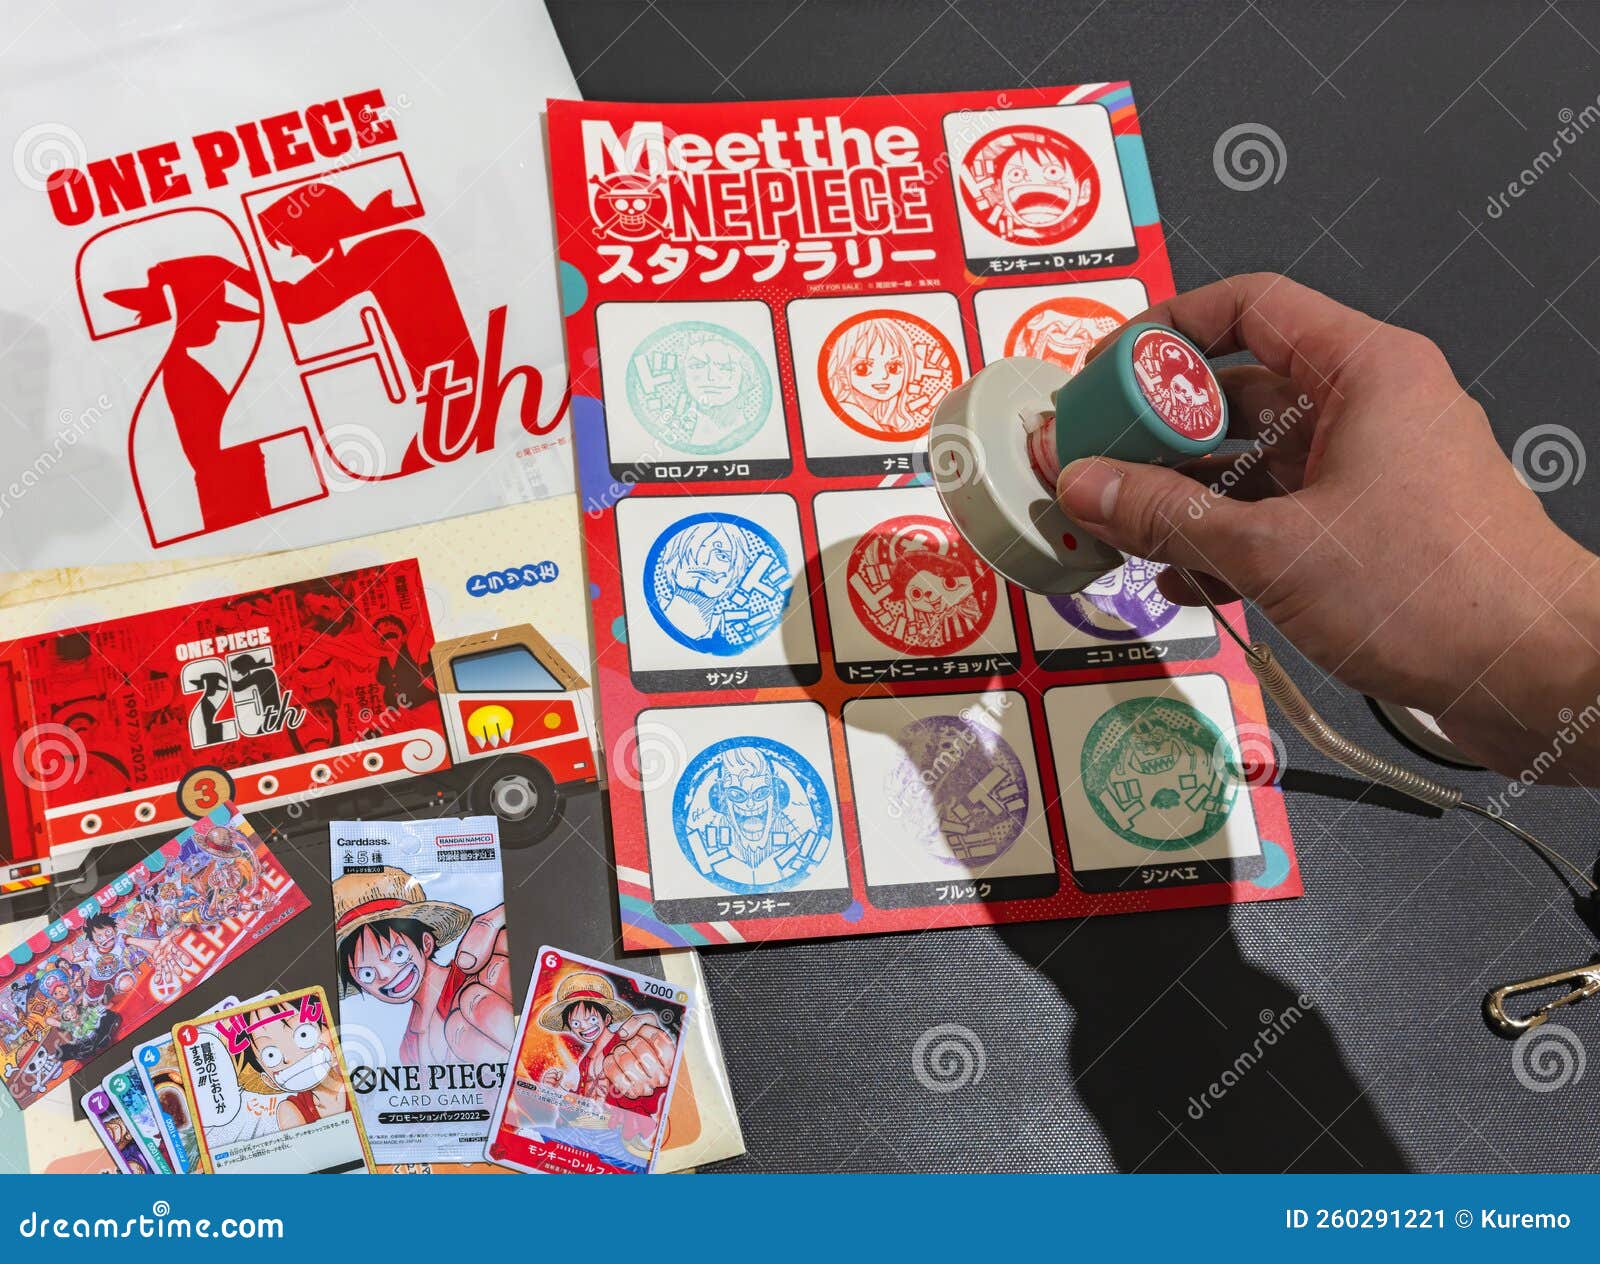 Hand Holding a Rubber Stamp of Characters from Japanese Manga One